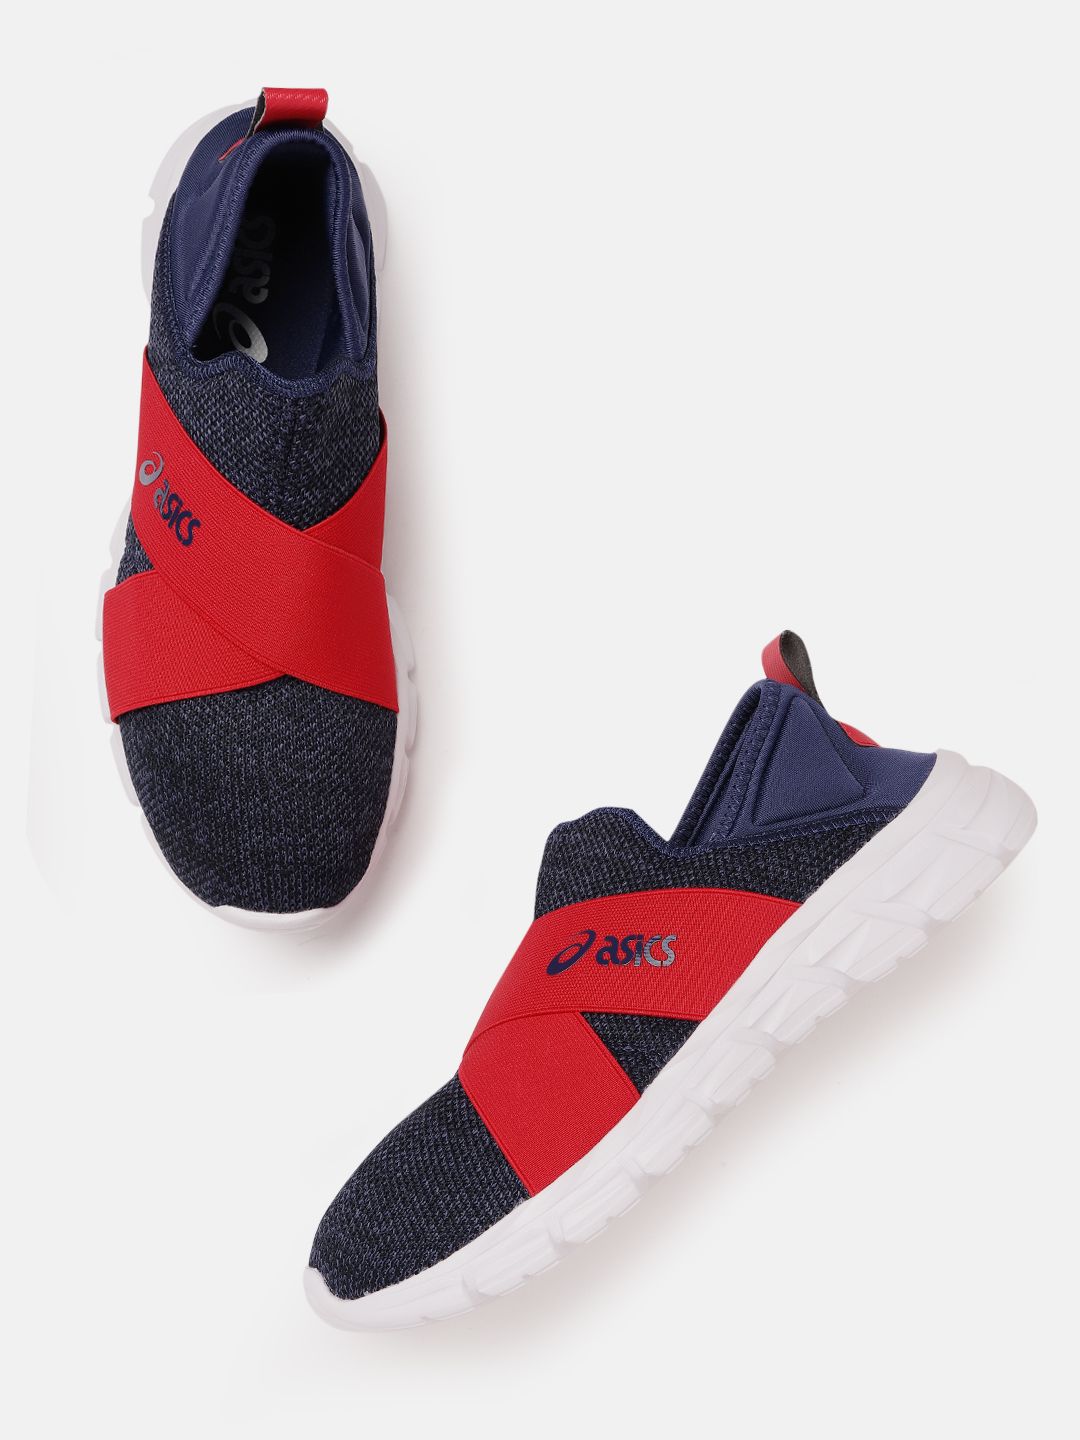 ASICS Unisex Navy Blue & Red Woven Design Quantum Lyte Slip-on Sneakers Price in India